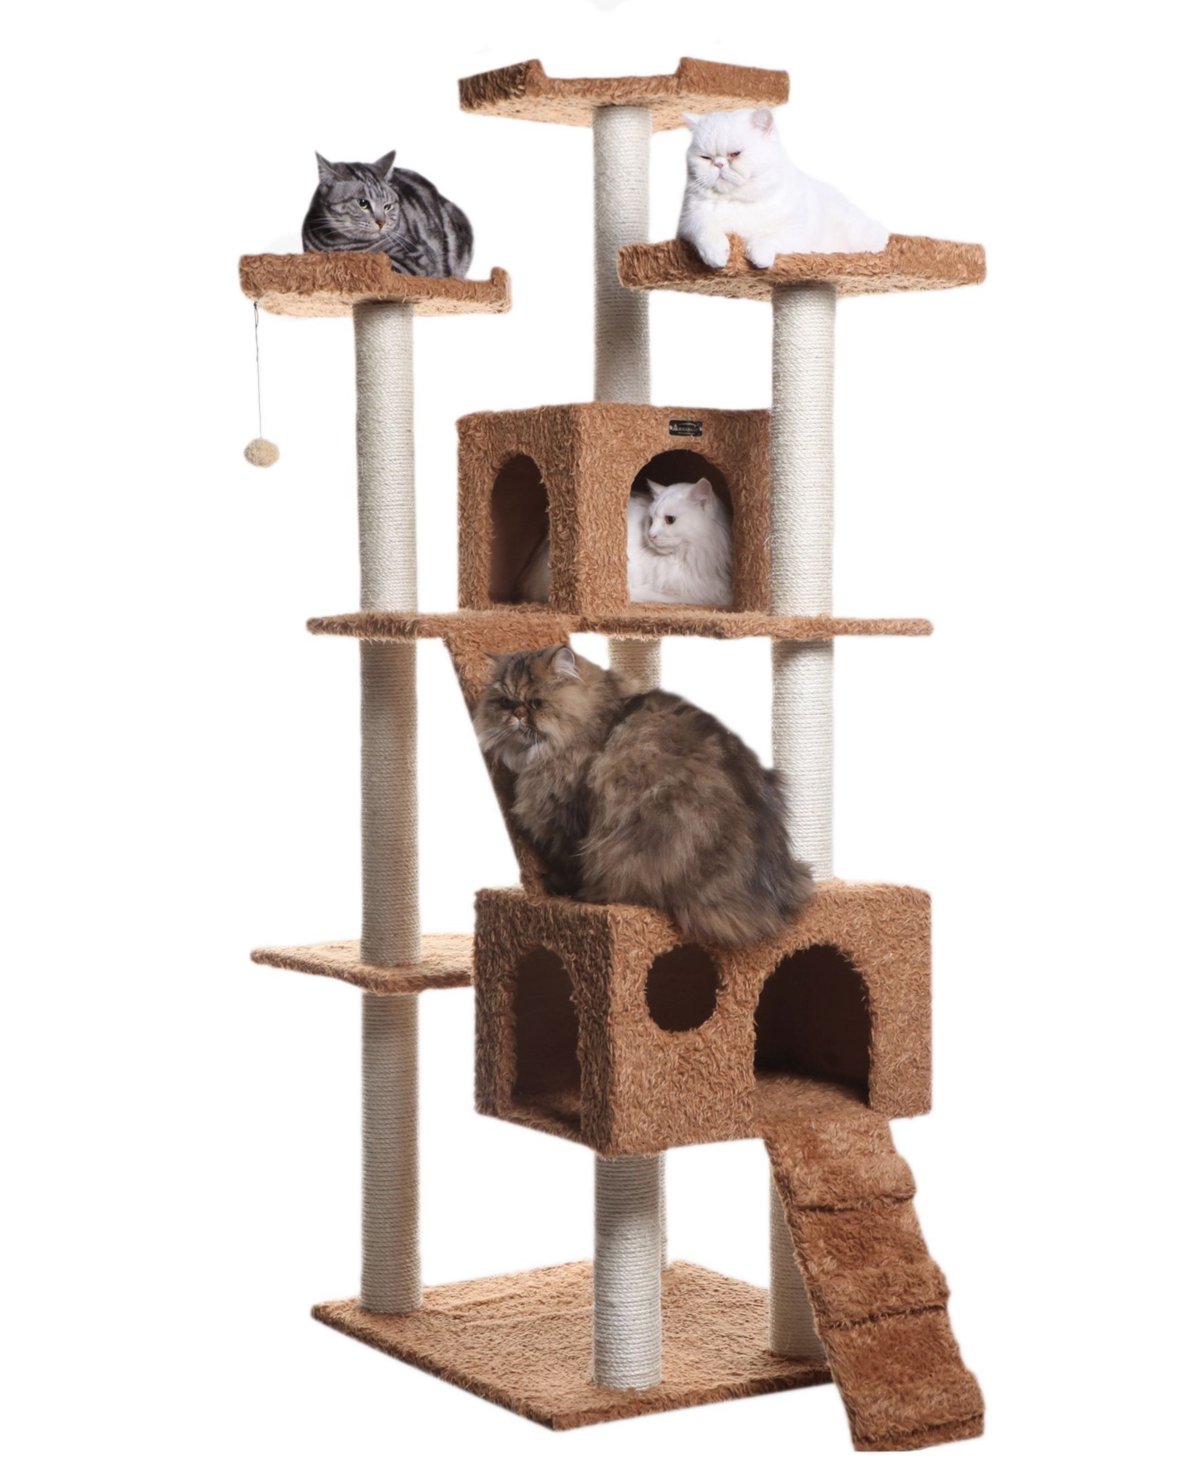 74" Multi-Level Real Wood Cat Tree With Scratching Posts - Ochre Brown